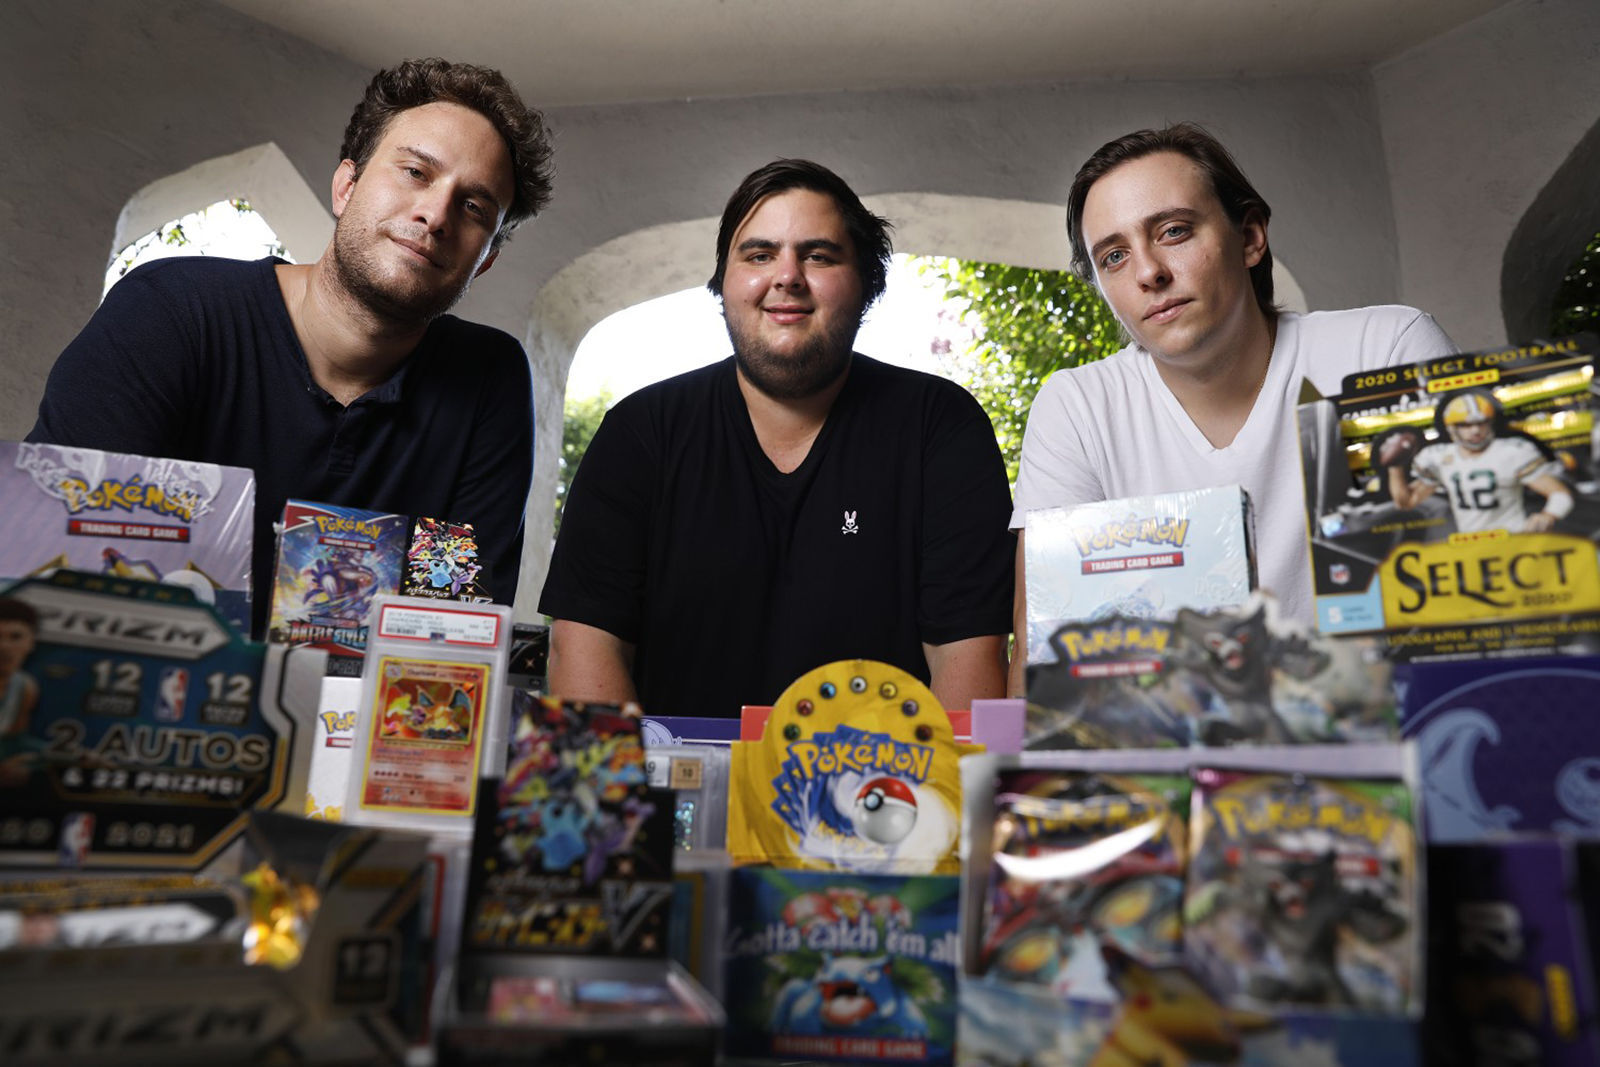 Anthony Jimenez, Michael Hotchkiss, and Gio Mancuso, from left, who run a live Instagram show selling and buying Pokemon collectibles, are photographed in Los Angeles.    PHOTO CREDIT: Tribune News Service